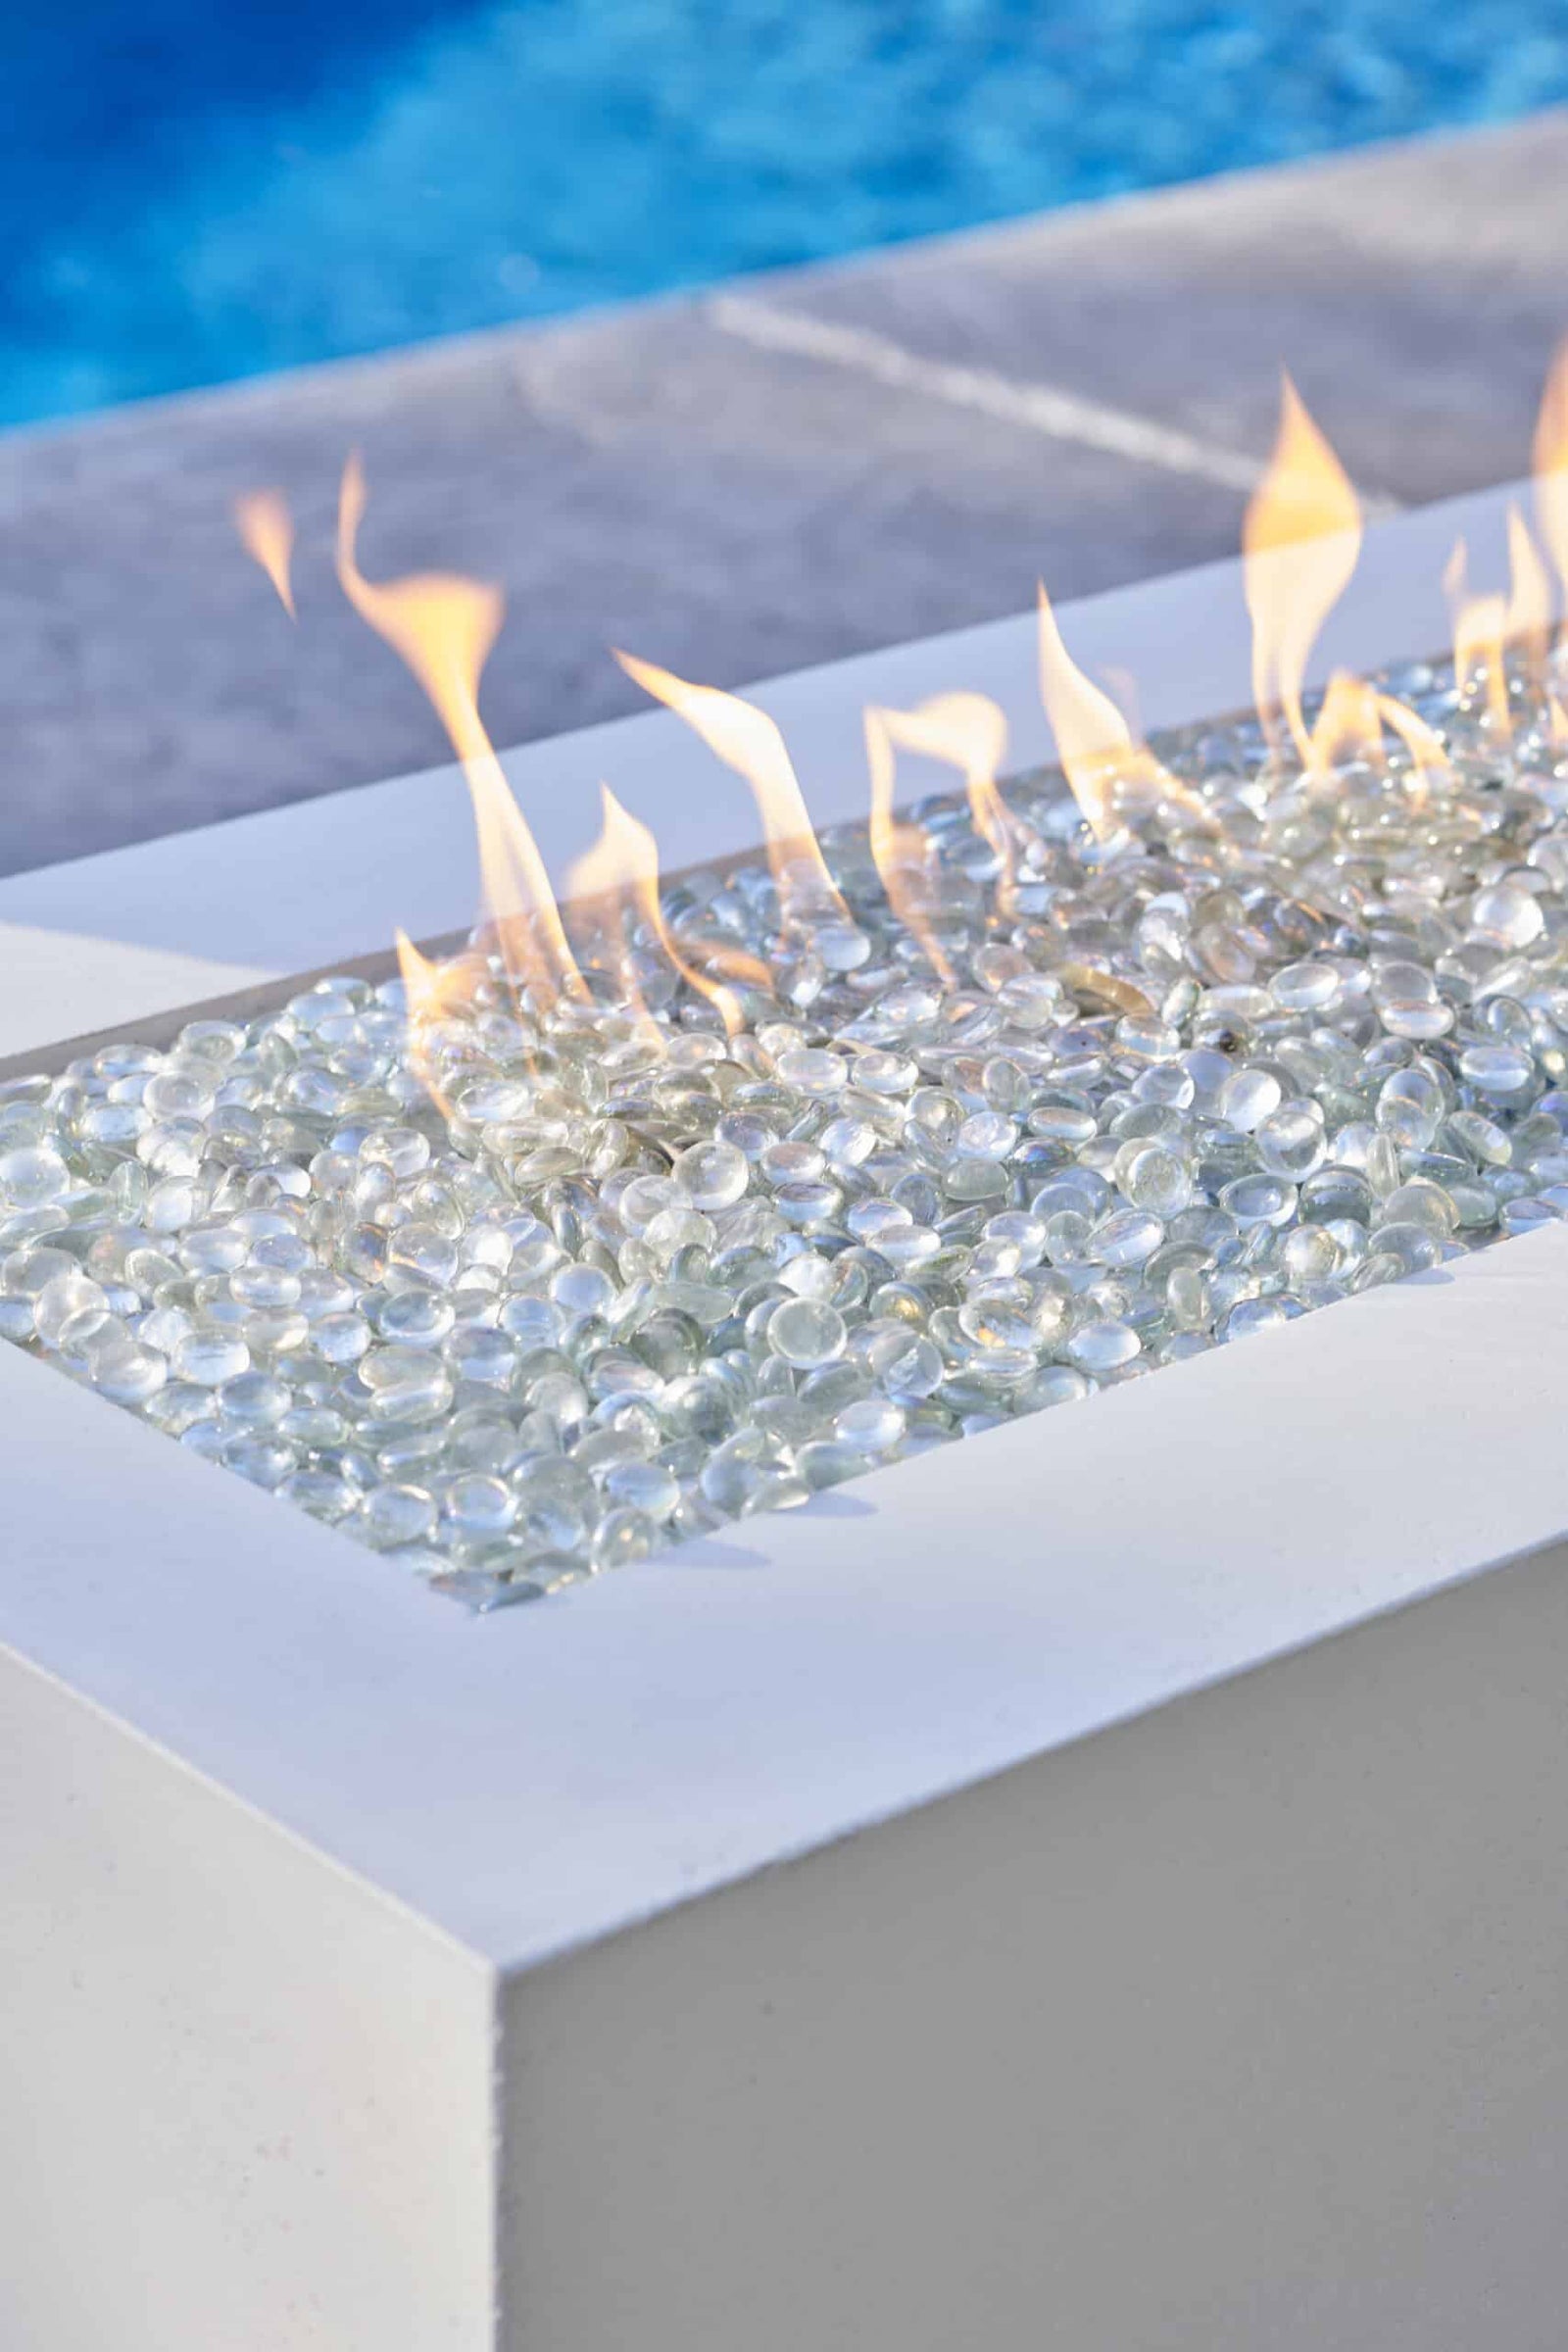 What's Best for My Fire Pit Table: Natural Gas vs Liquid Propane?